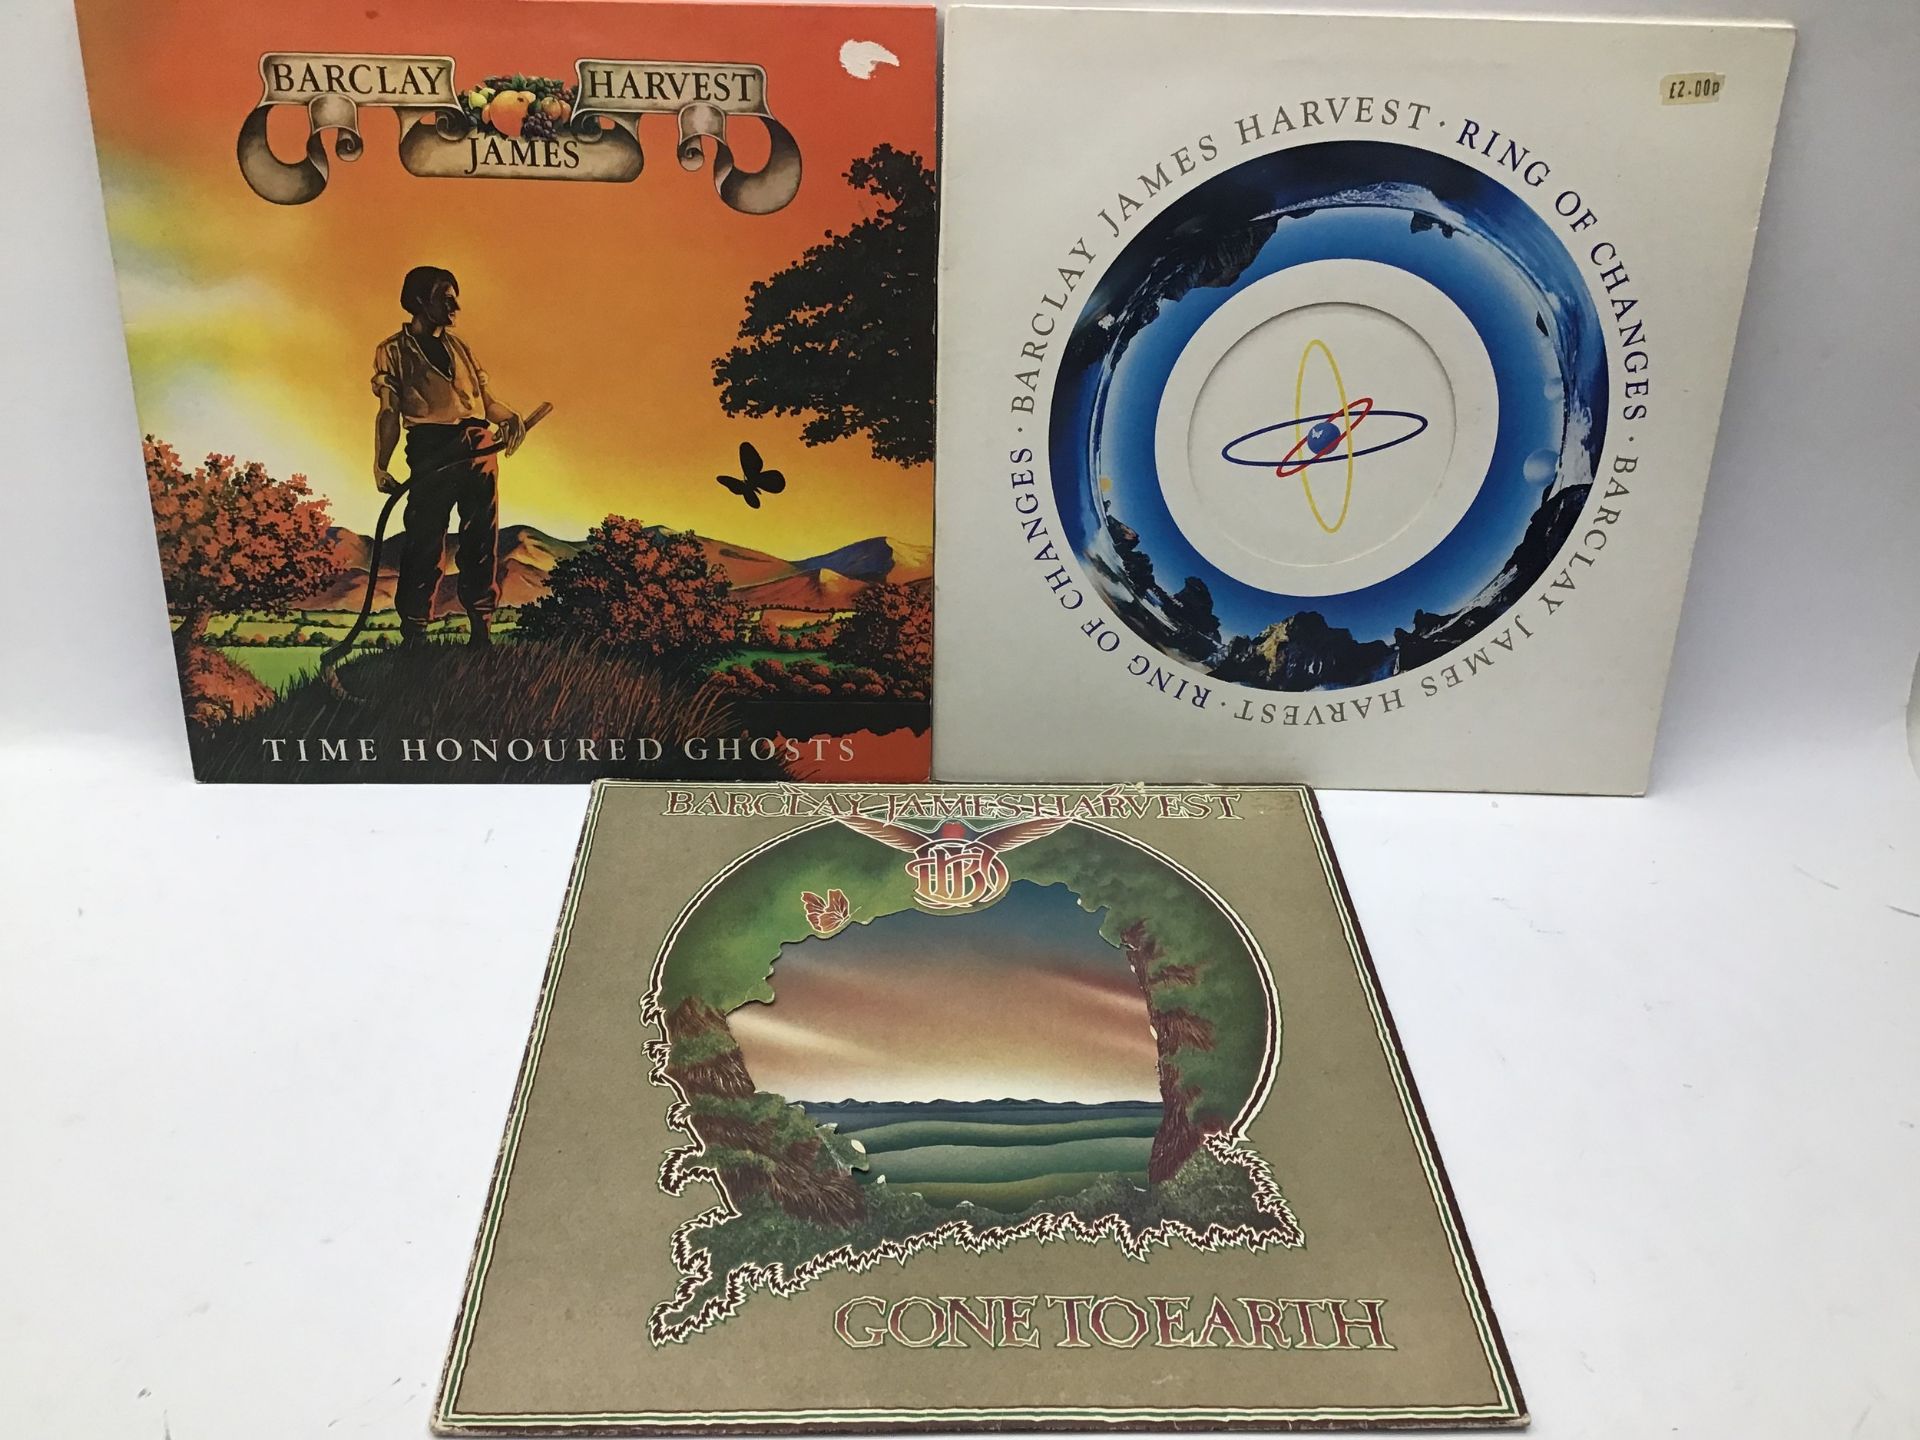 BARCLAY JAMES HARVEST LP RECORDS. 3 disc’s here in total to include - Ring Of Change - Gone To Earth